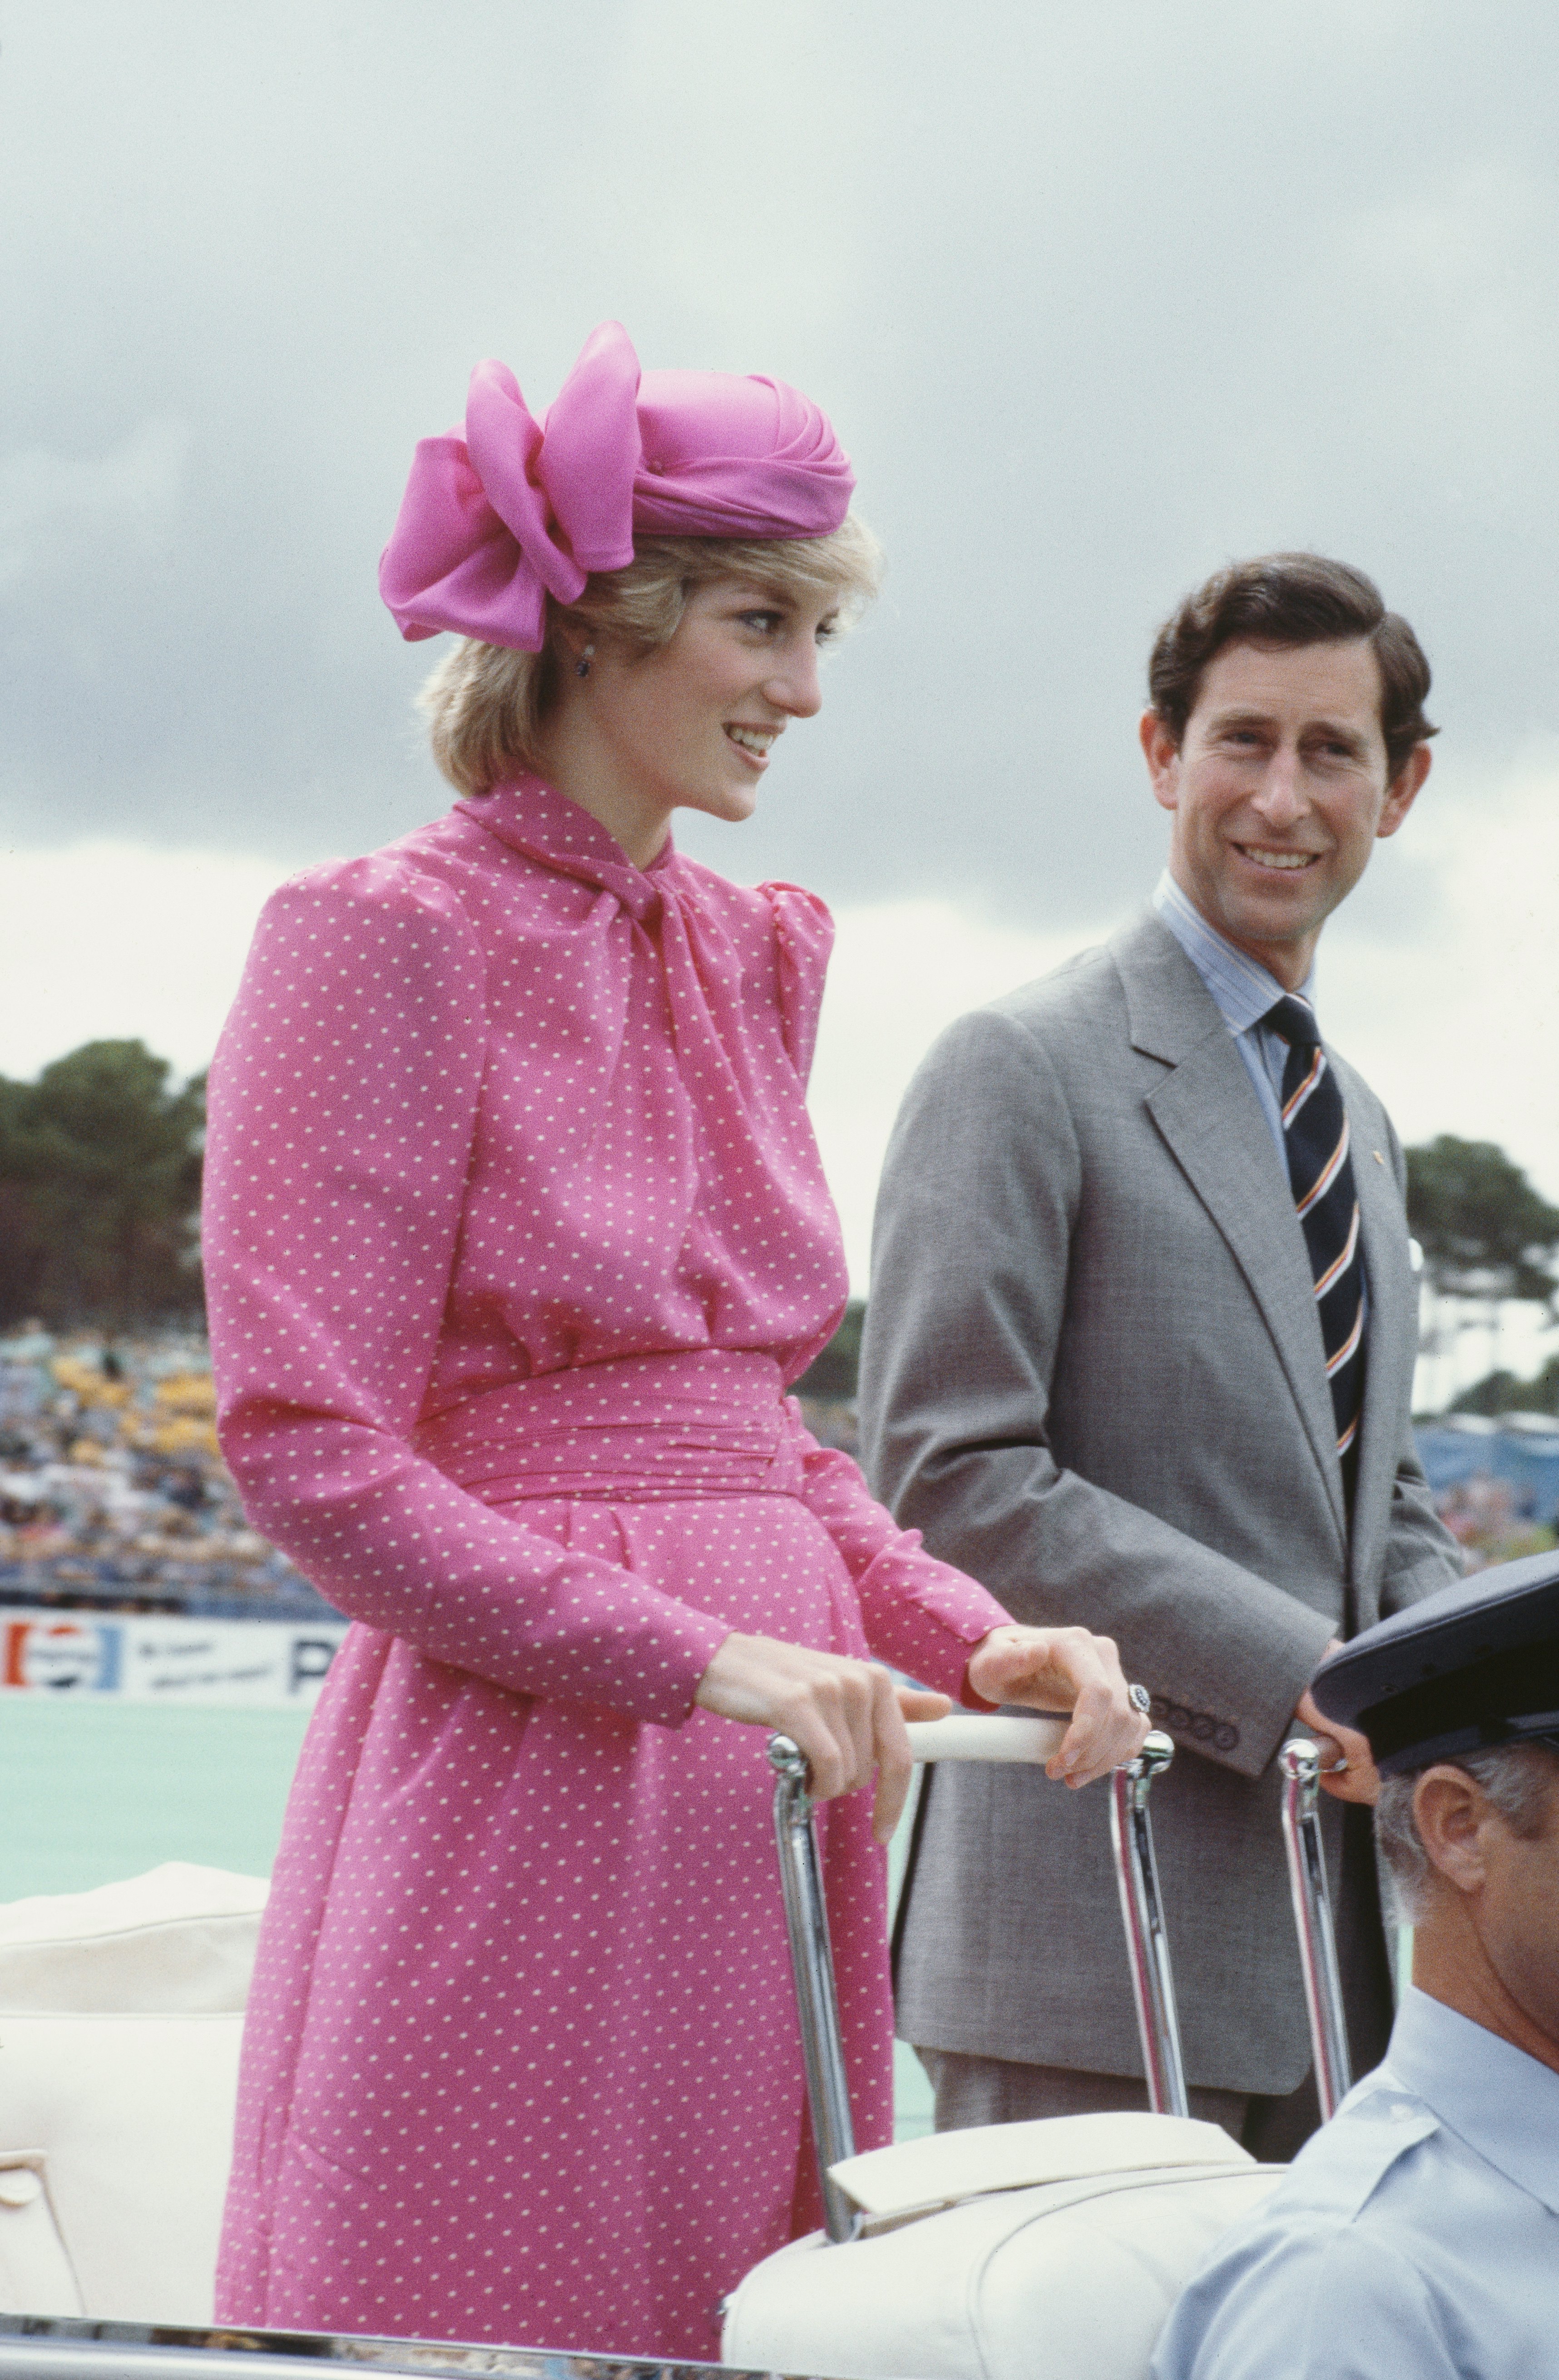 All Of Princess Diana's Most Iconic Outfits In The Crown | Glamour UK